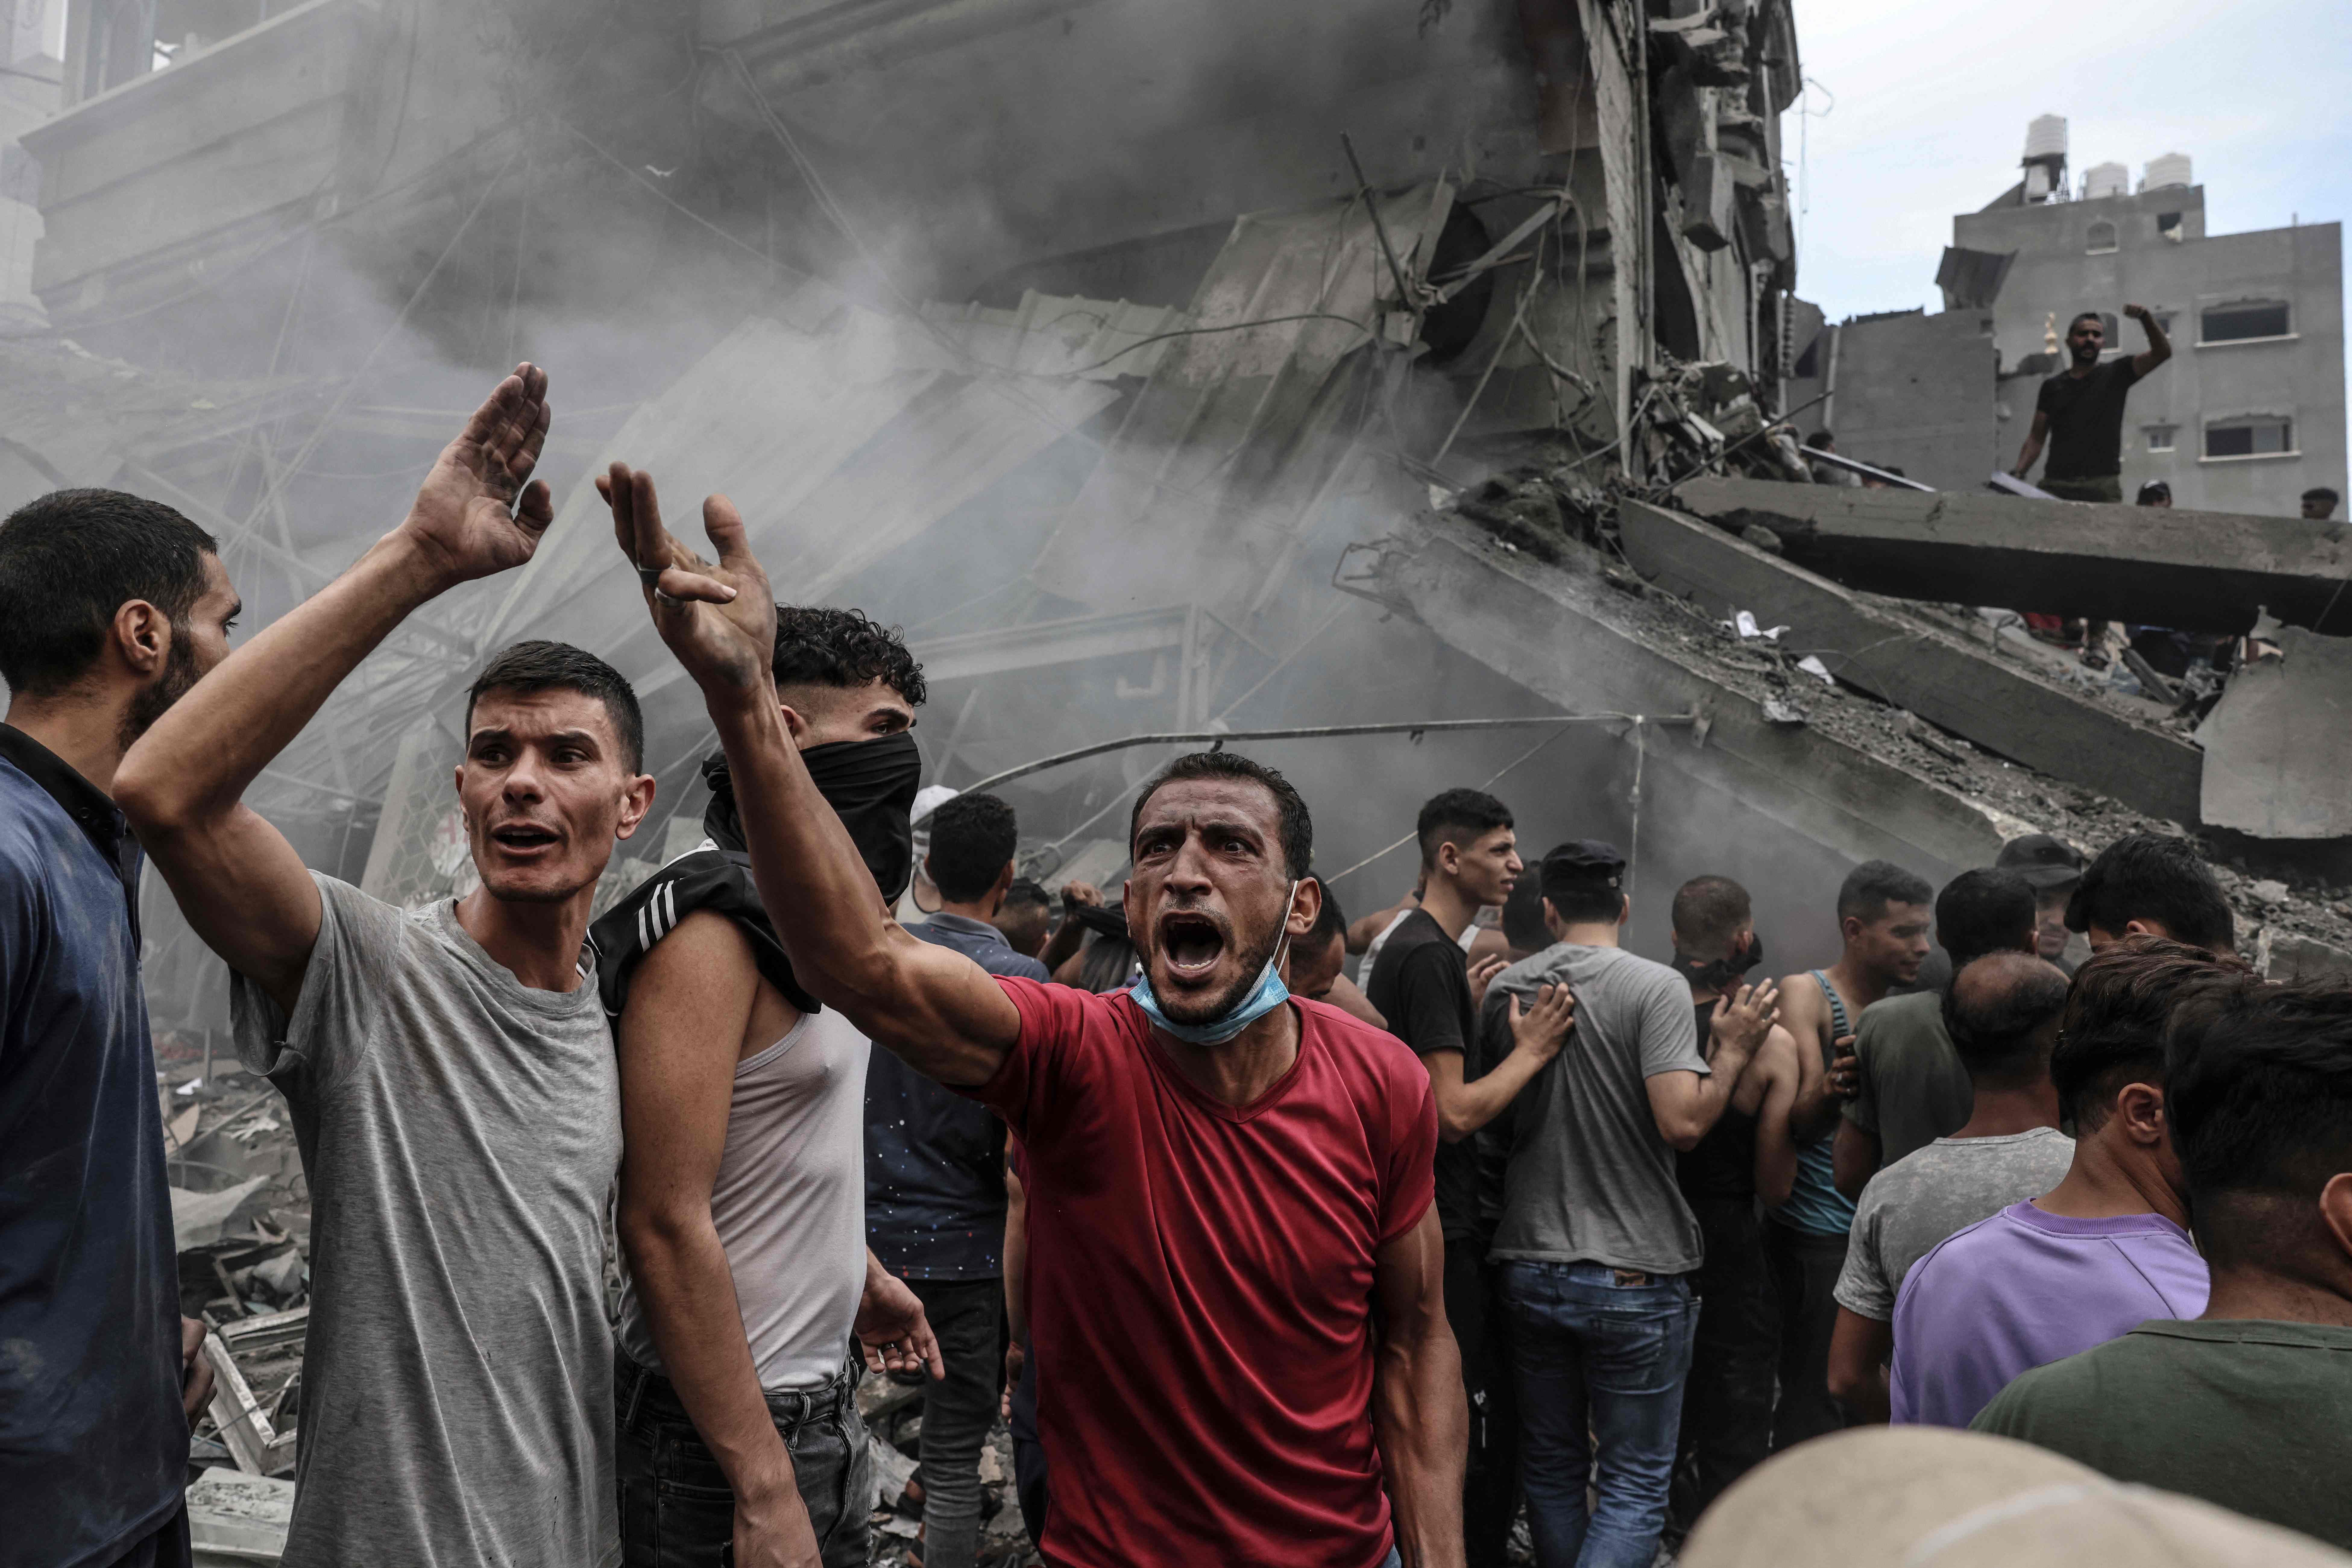 Palestinians search for survivors after an Israeli airstrike on buildings in the refugee camp of Jabalia in the Gaza Strip